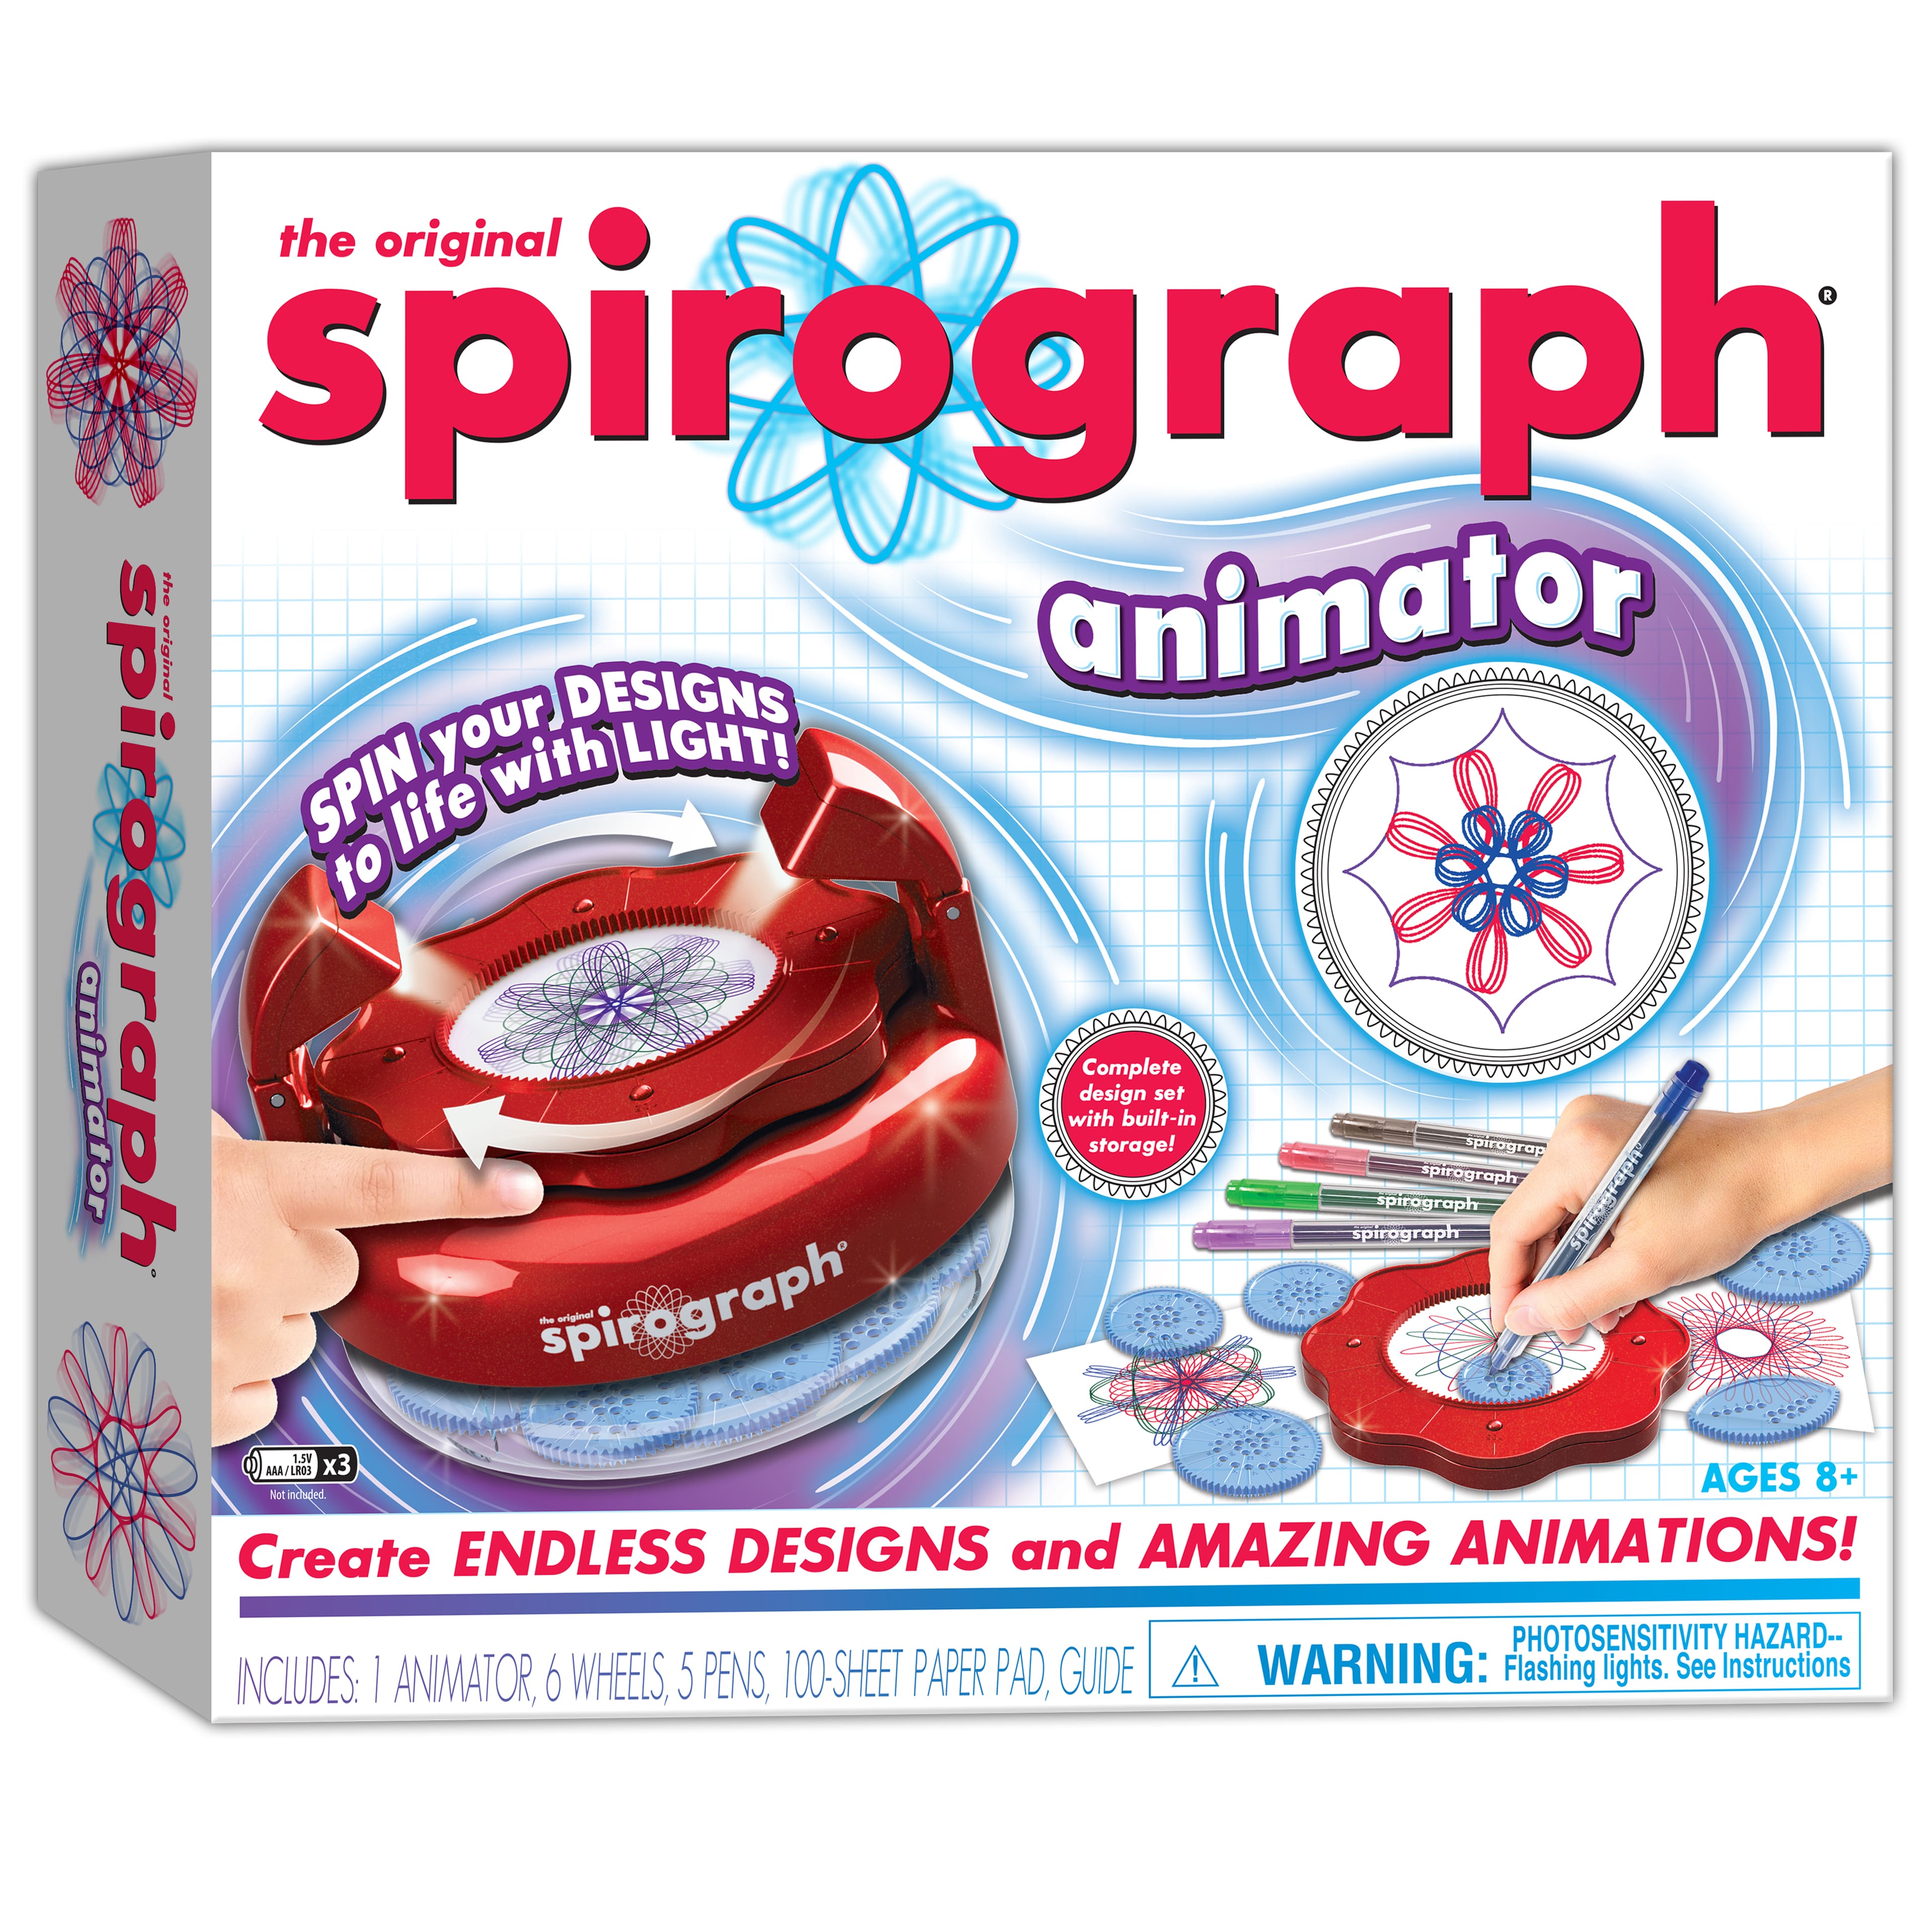 Spirograph Animator -- Create Amazing 3D Designs with Lights and Spinning Action - image 3 of 10